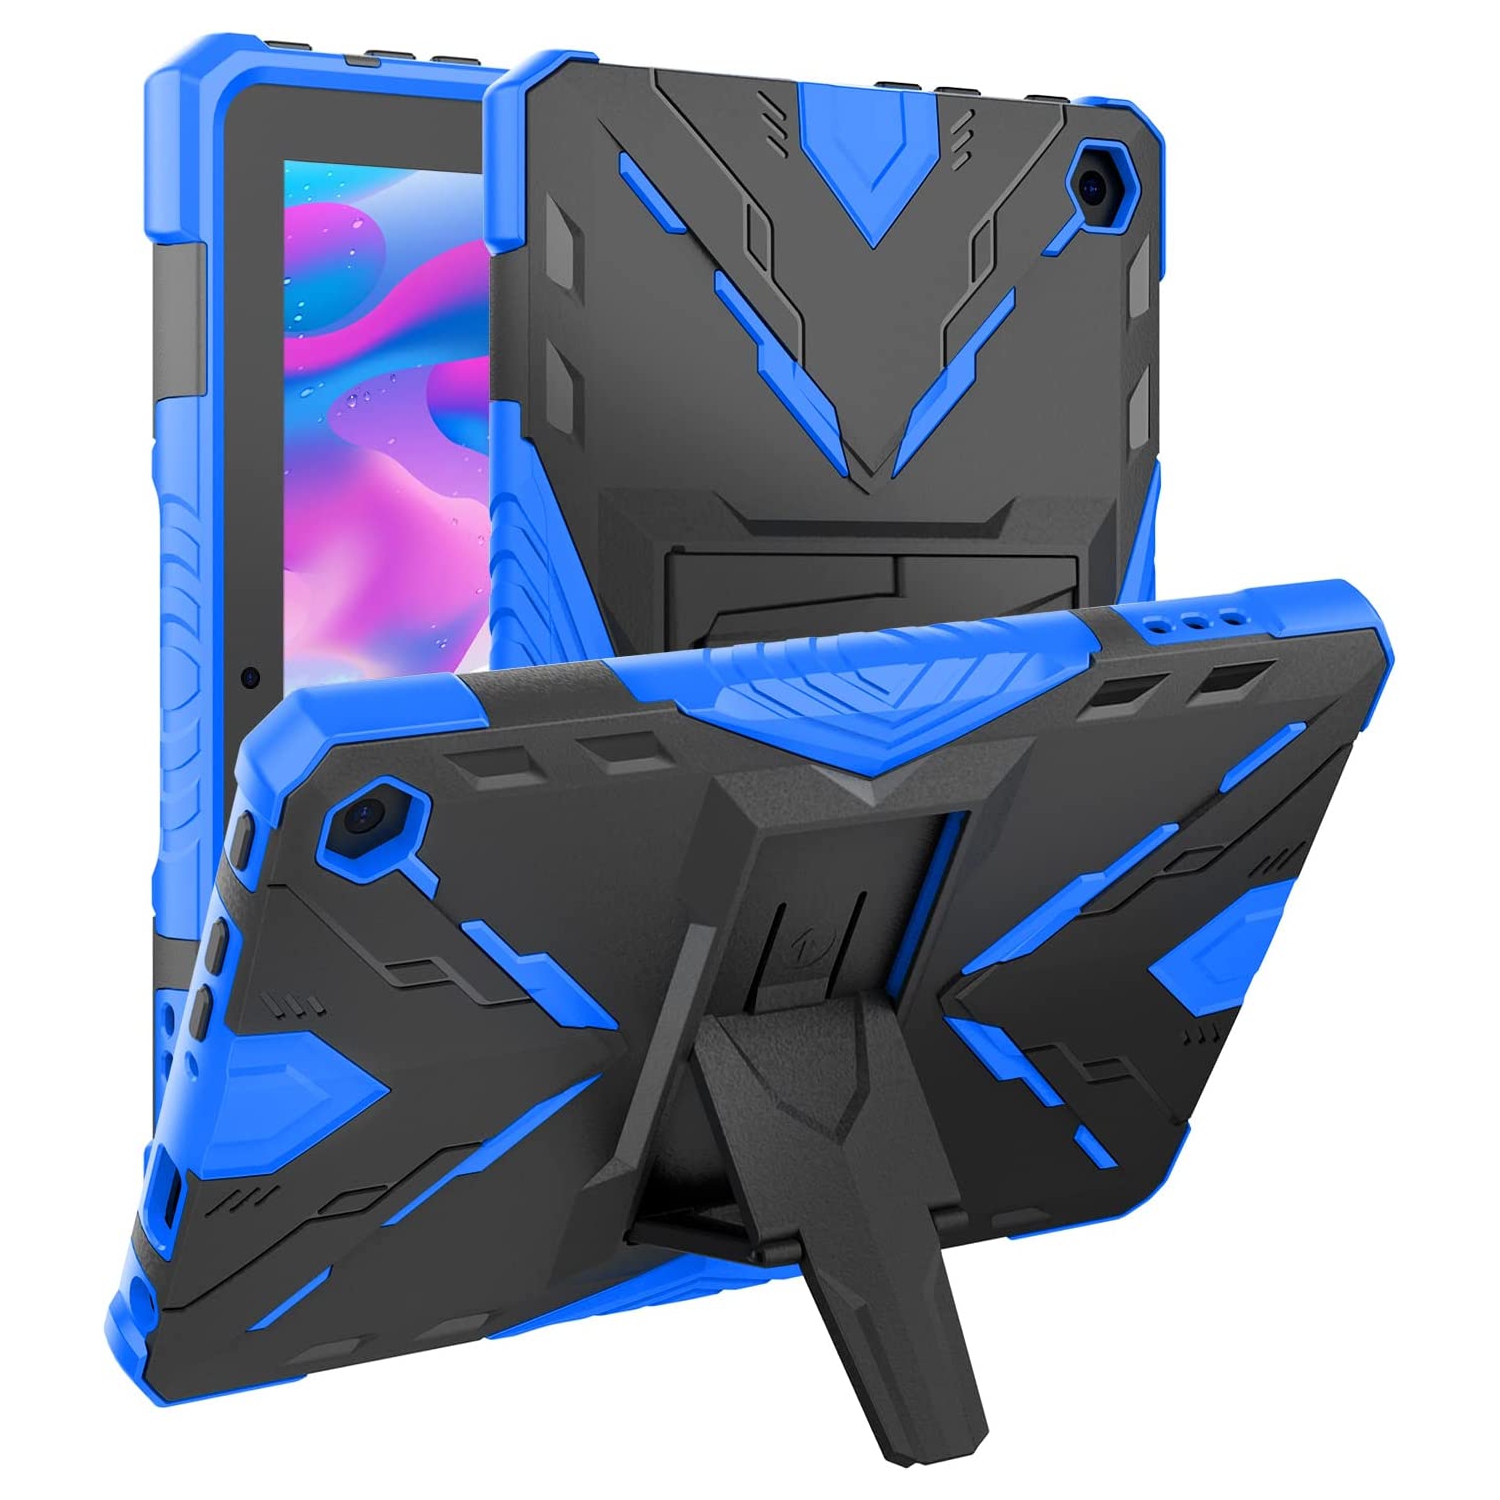 M for New Kindle Fire 7 Case 12th Generation 2022 Release,Kickstand Heavy Duty Armor Defender Cover (Blue)